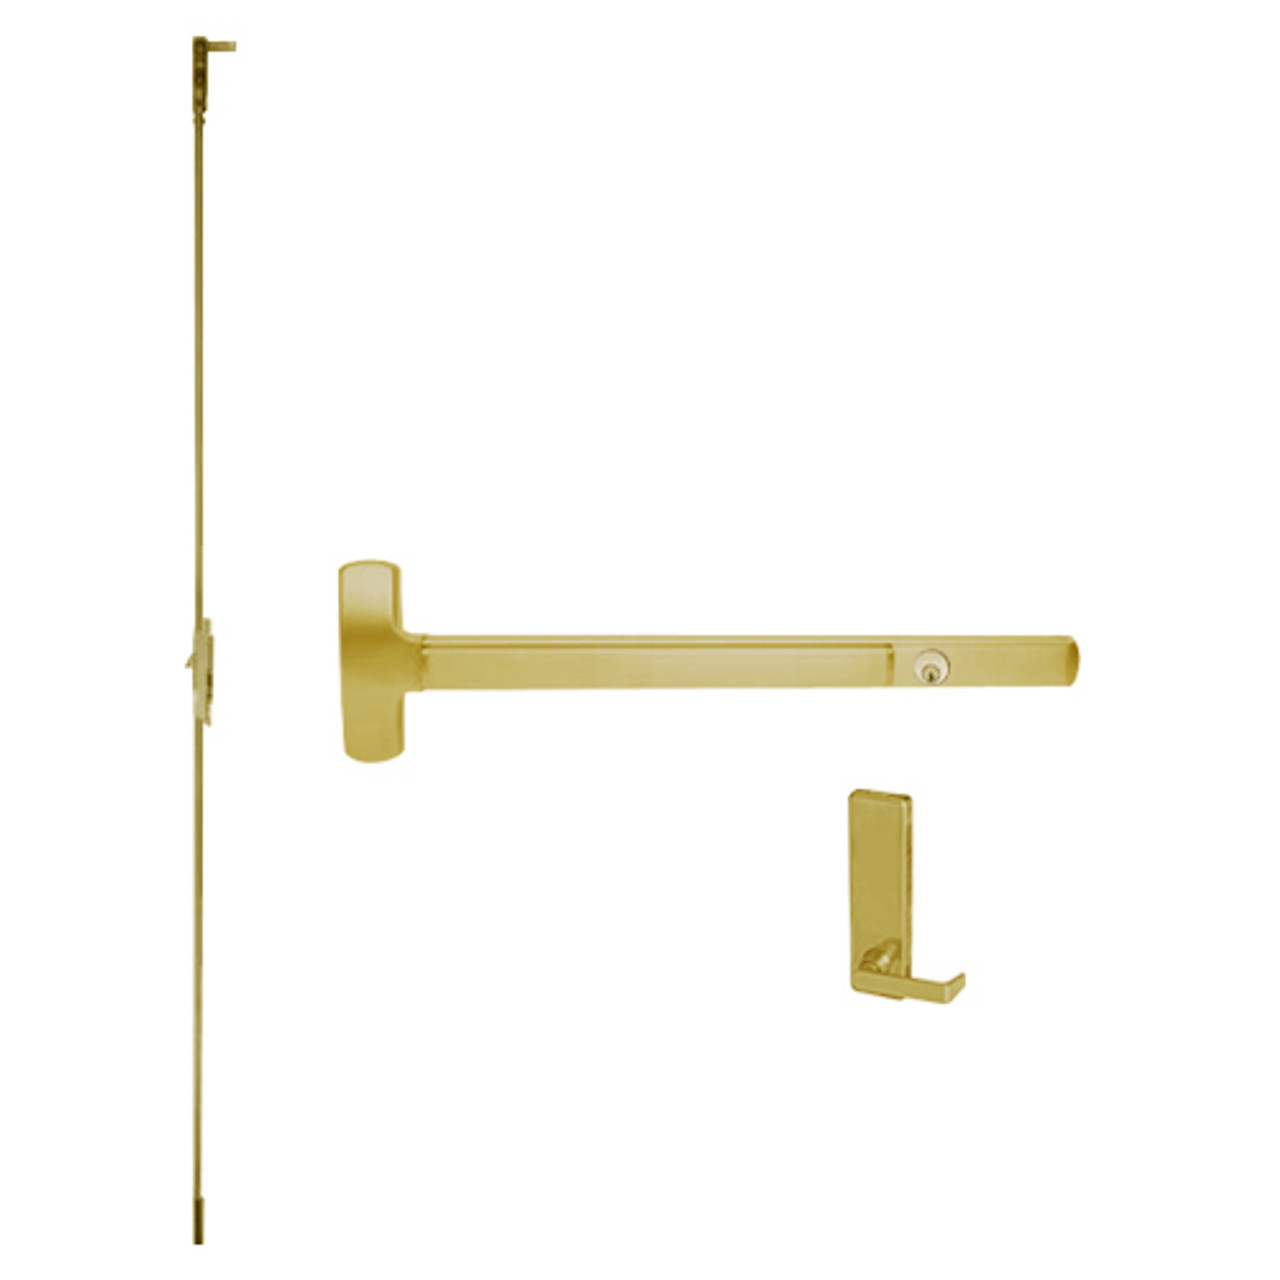 CD25-C-L-DT-DANE-US3-2-LHR Falcon Exit Device in Polished Brass